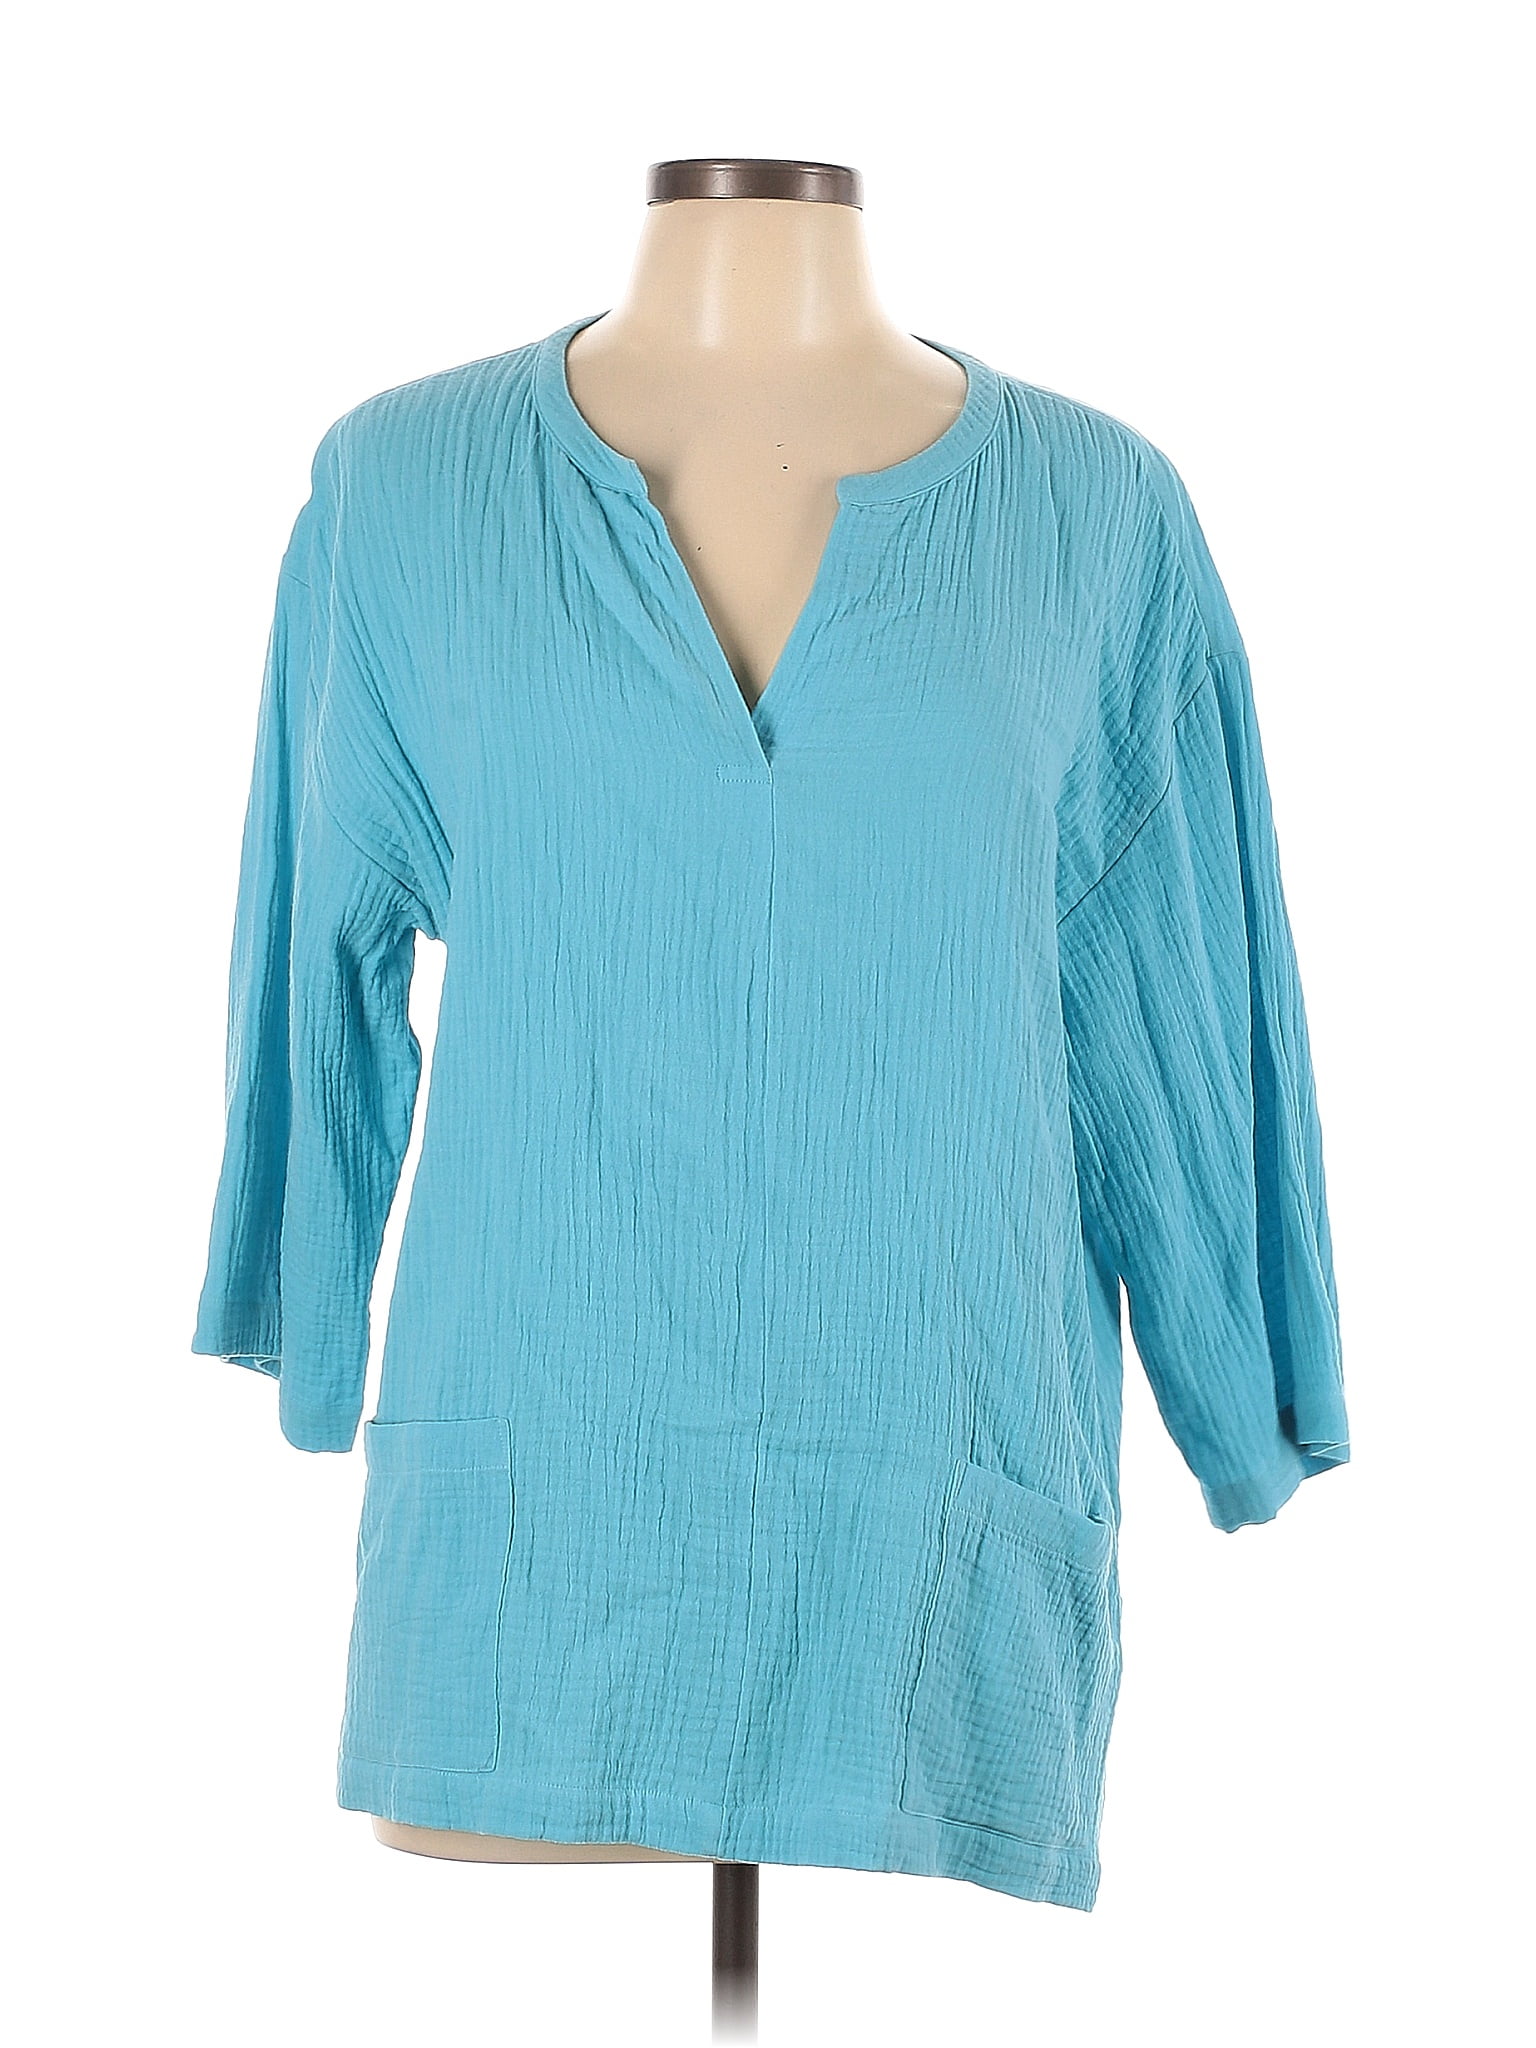 Soft Surroundings 100% Cotton Solid Blue Teal Long Sleeve Top Size L - 64%  off